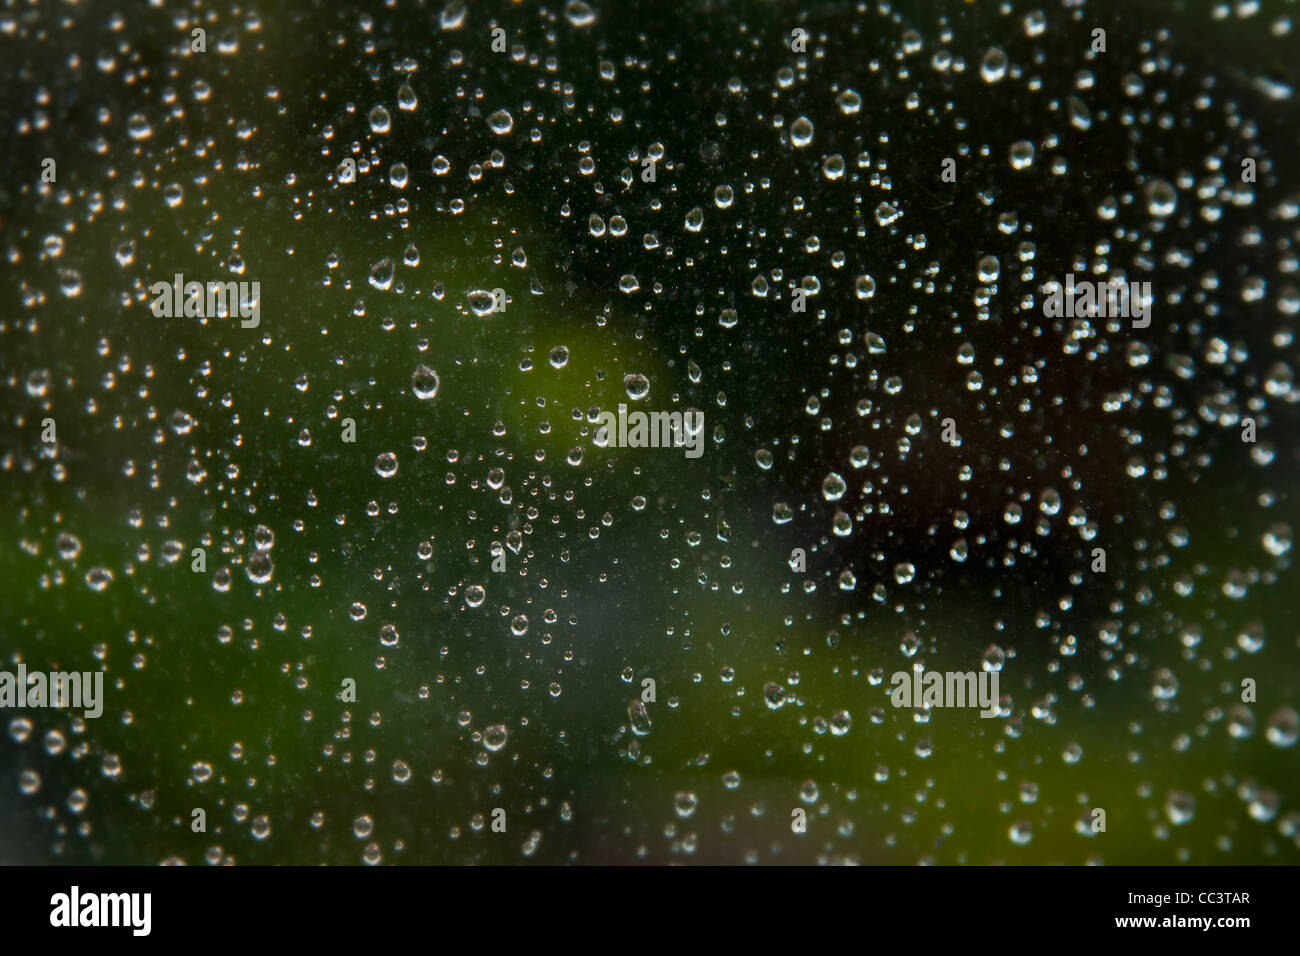 water droplets on glass window Stock Photo